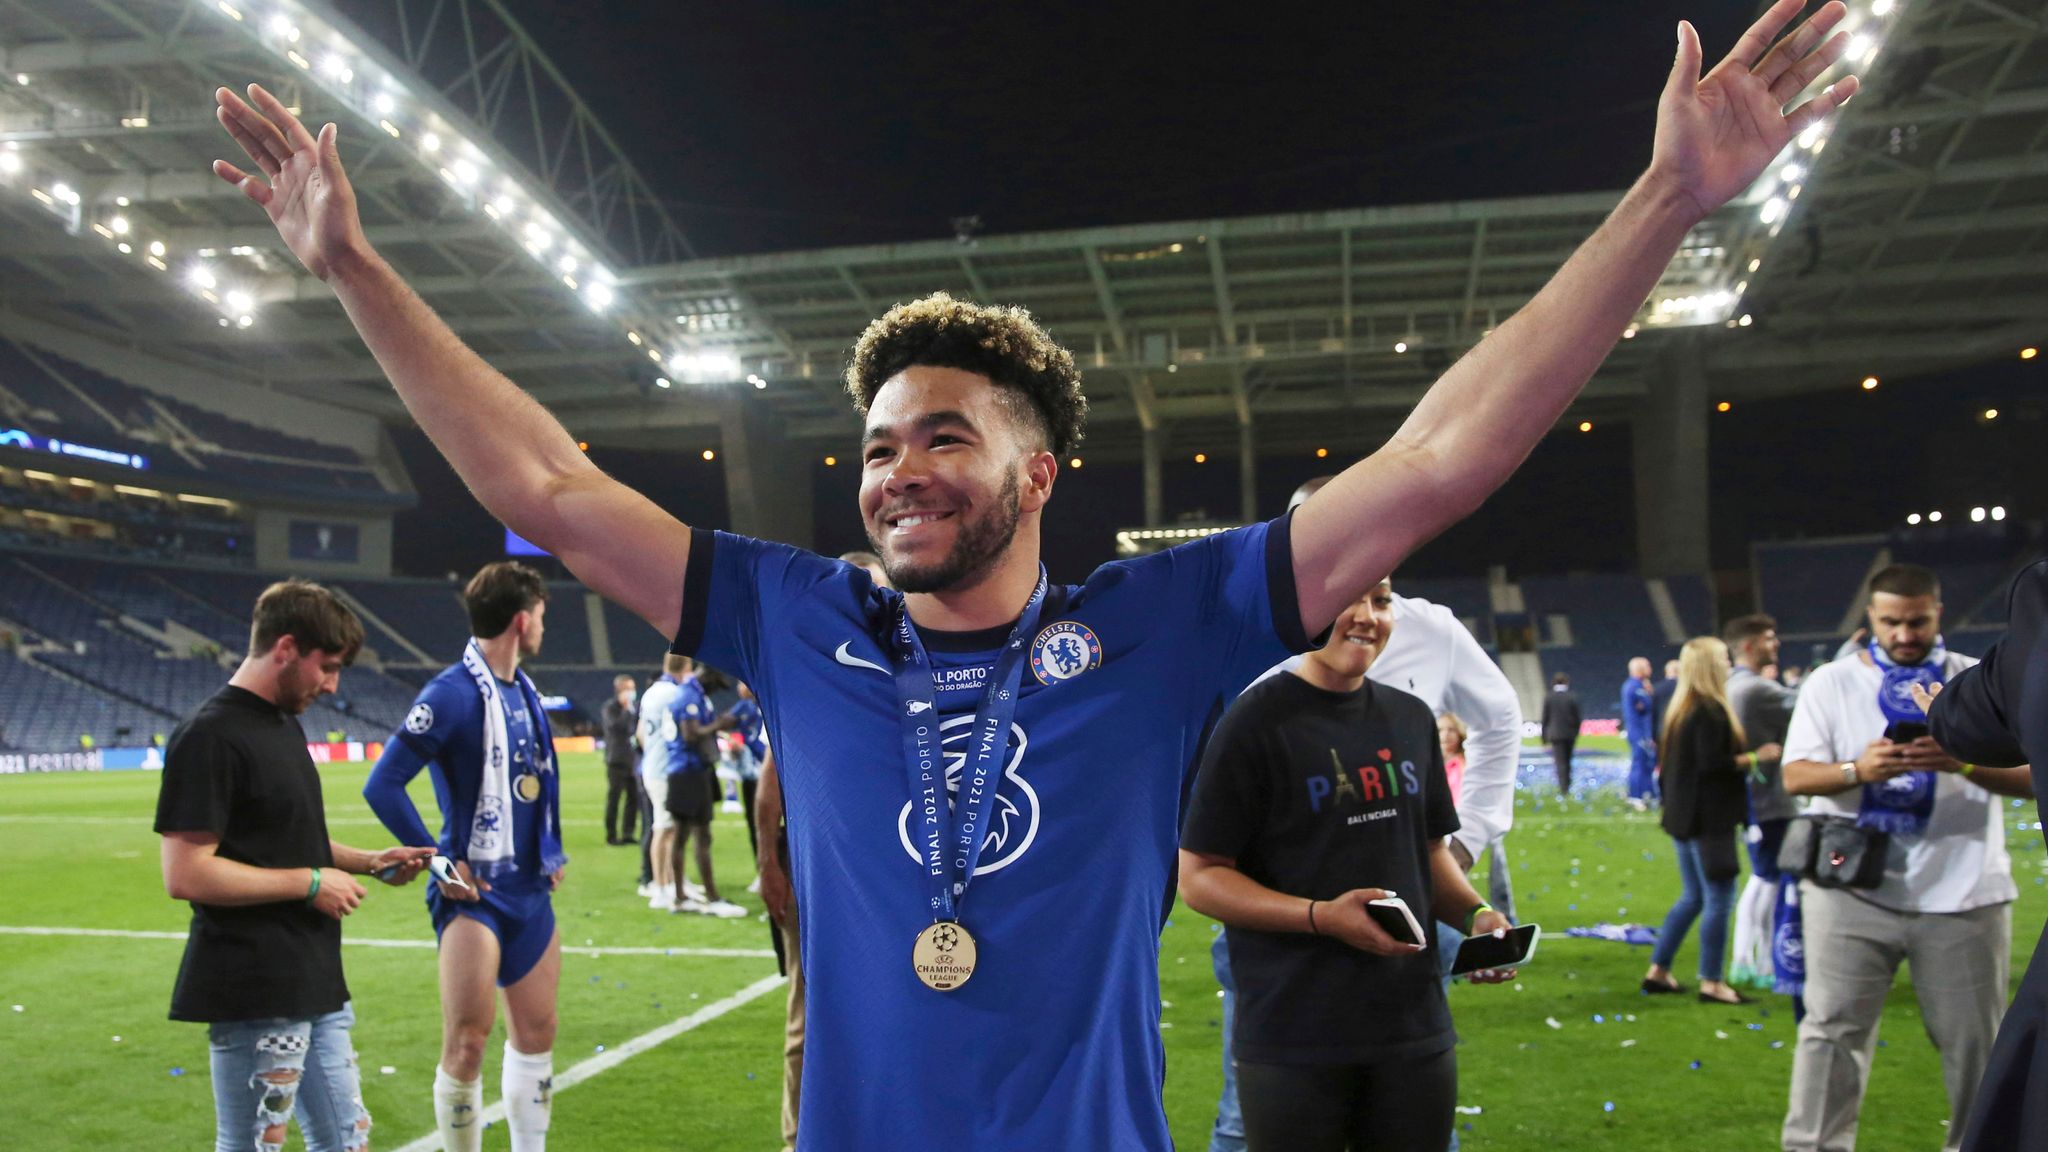 Reece James: Chelsea and England star issues warning to 'low life' burglars who stole winners' medals - 'we are closing in on them'